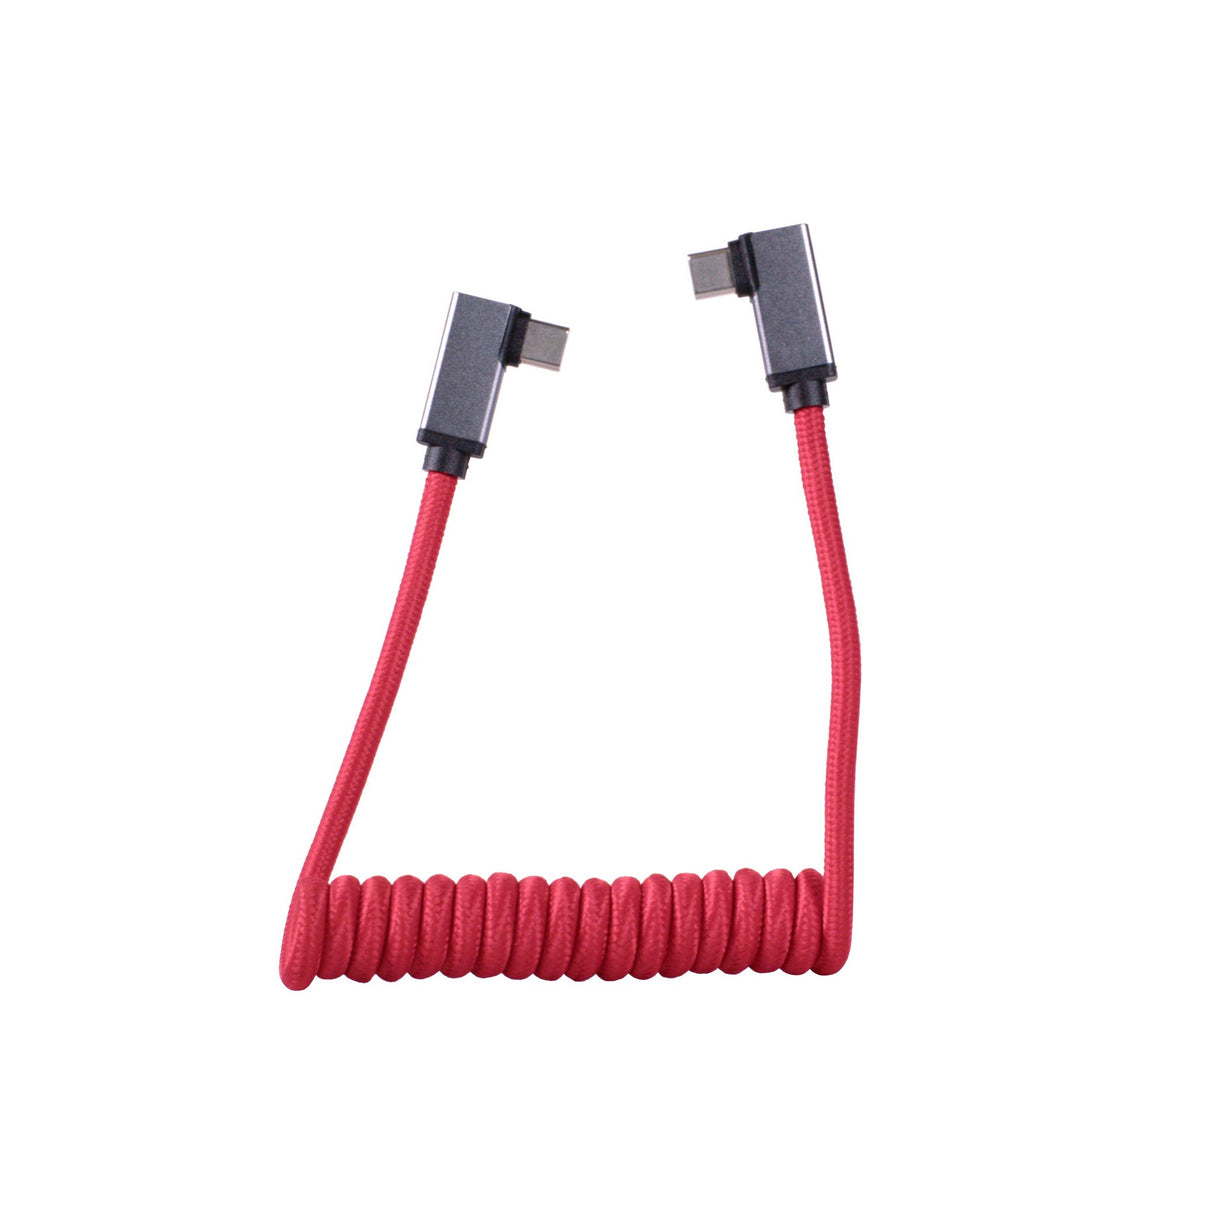 1SV USB-C to USB-C Right Angle High Speed Cable, 8-Inches, Red